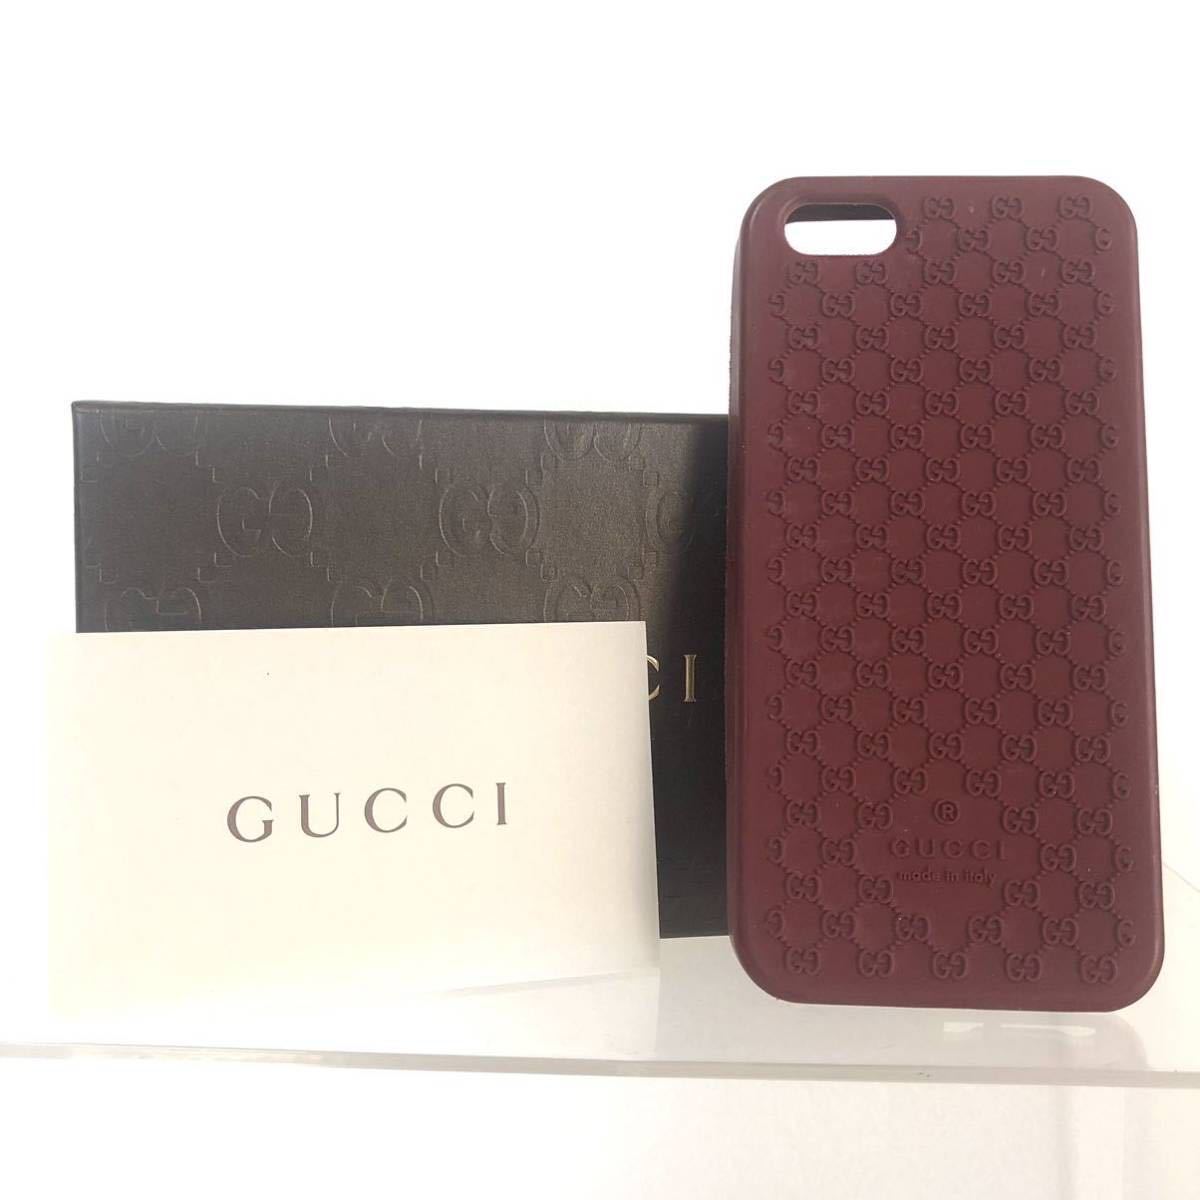 Beautiful and rare Gucci Gucci iPhone case made of rubber, made in Italy, for